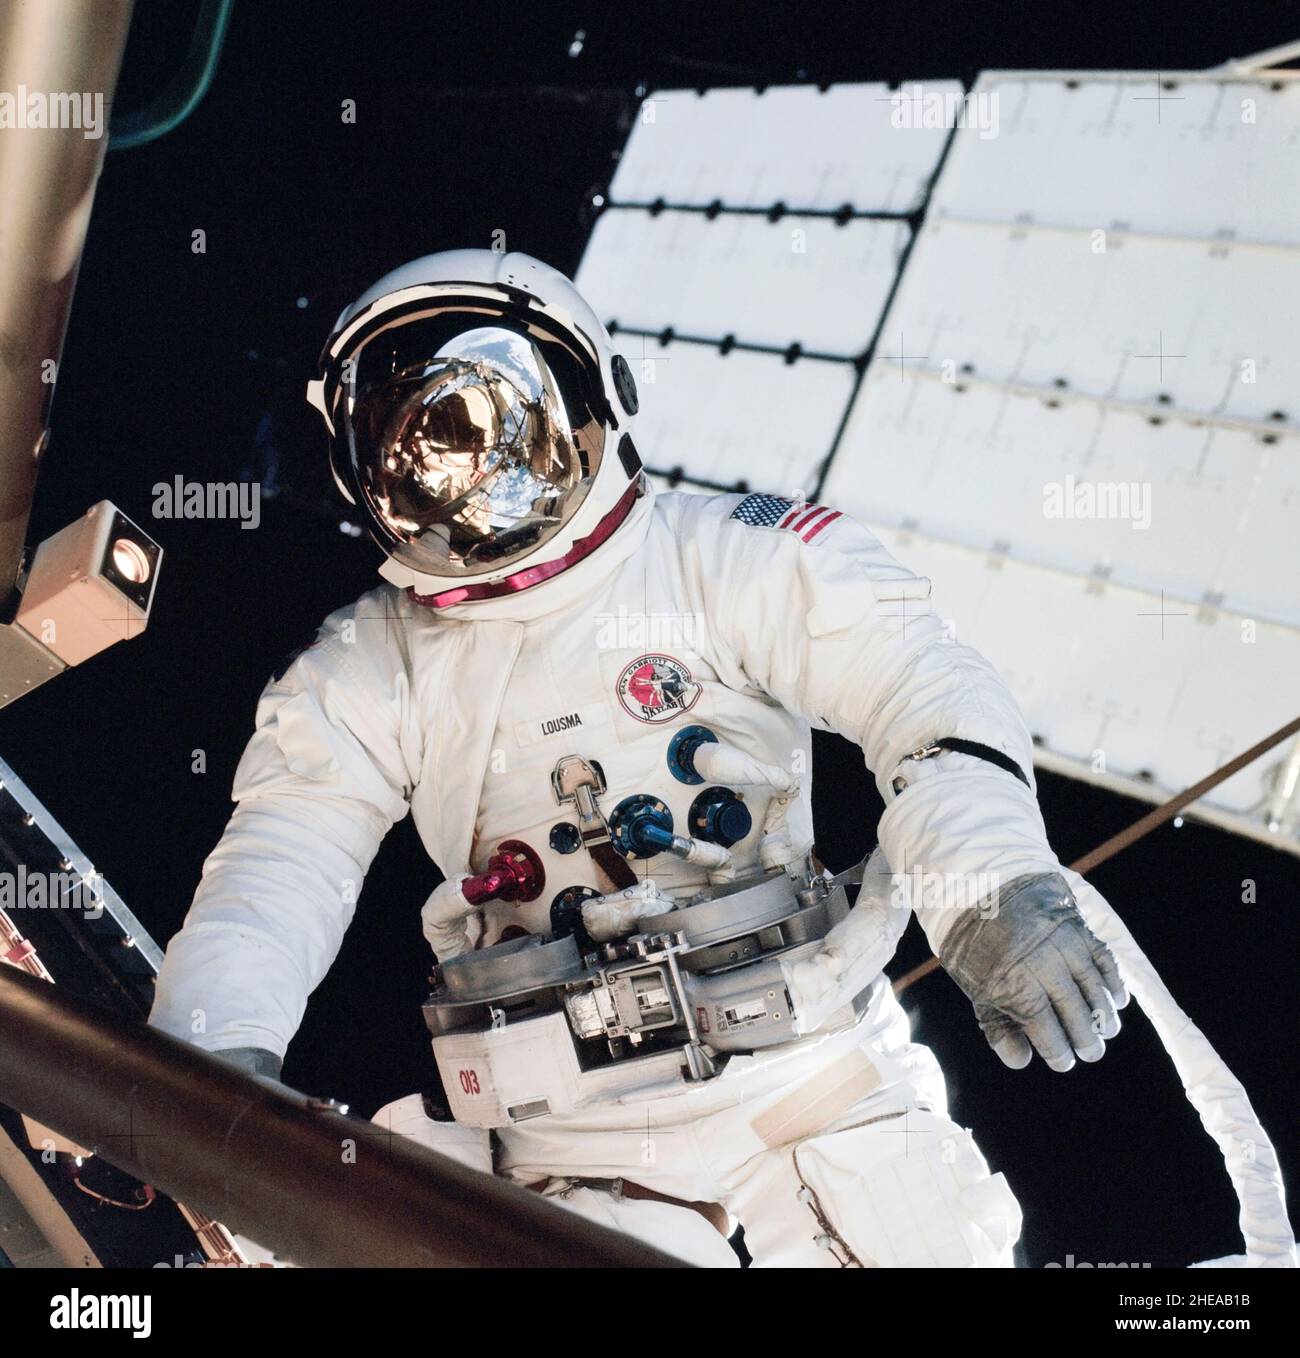 (6 Aug. 1973) --- Astronaut Jack R. Lousma, Skylab 3 pilot, participates in the Aug. 6, 1973, extravehicular activity (EVA) during which he and astronaut Owen K. Garriott, science pilot, deployed the twin pole solar shield to help shade the Orbital Workshop (OWS). Note the striking reflection of the Earth in Lousma?s helmet visor. This photograph was taken with a 70mm hand-held Hasselblad camera Stock Photo